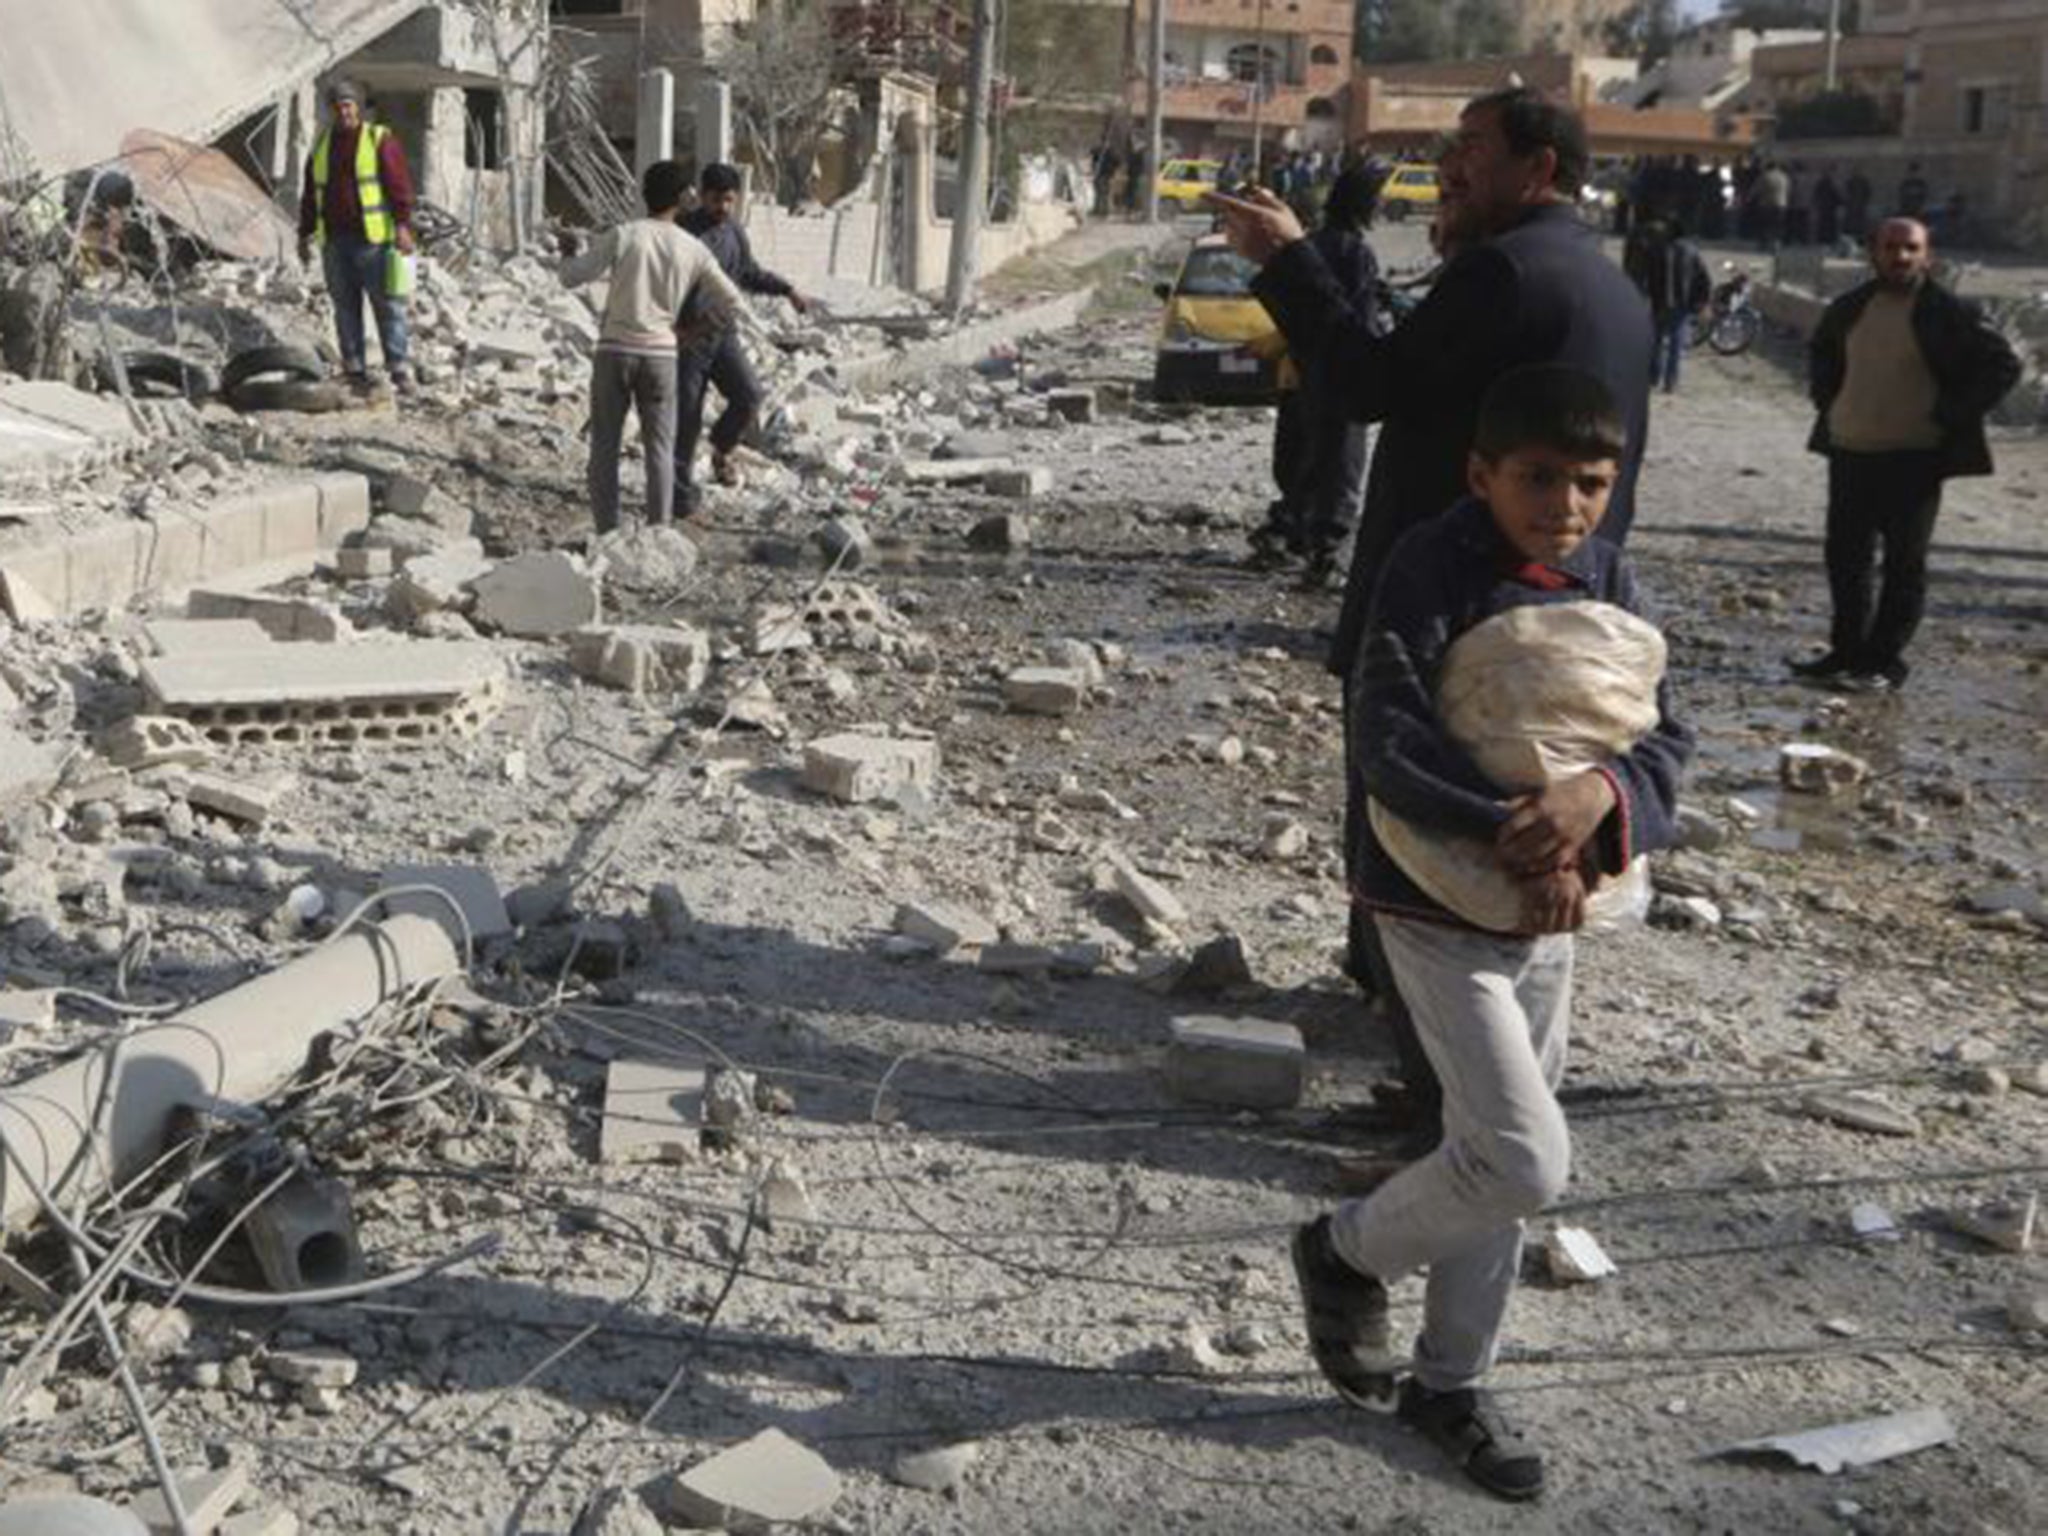 A boy carries bread as he walks past buildings in Raqqa destroyed by an air strike. Residents say water and electricity supplies are intermittent and food is running short